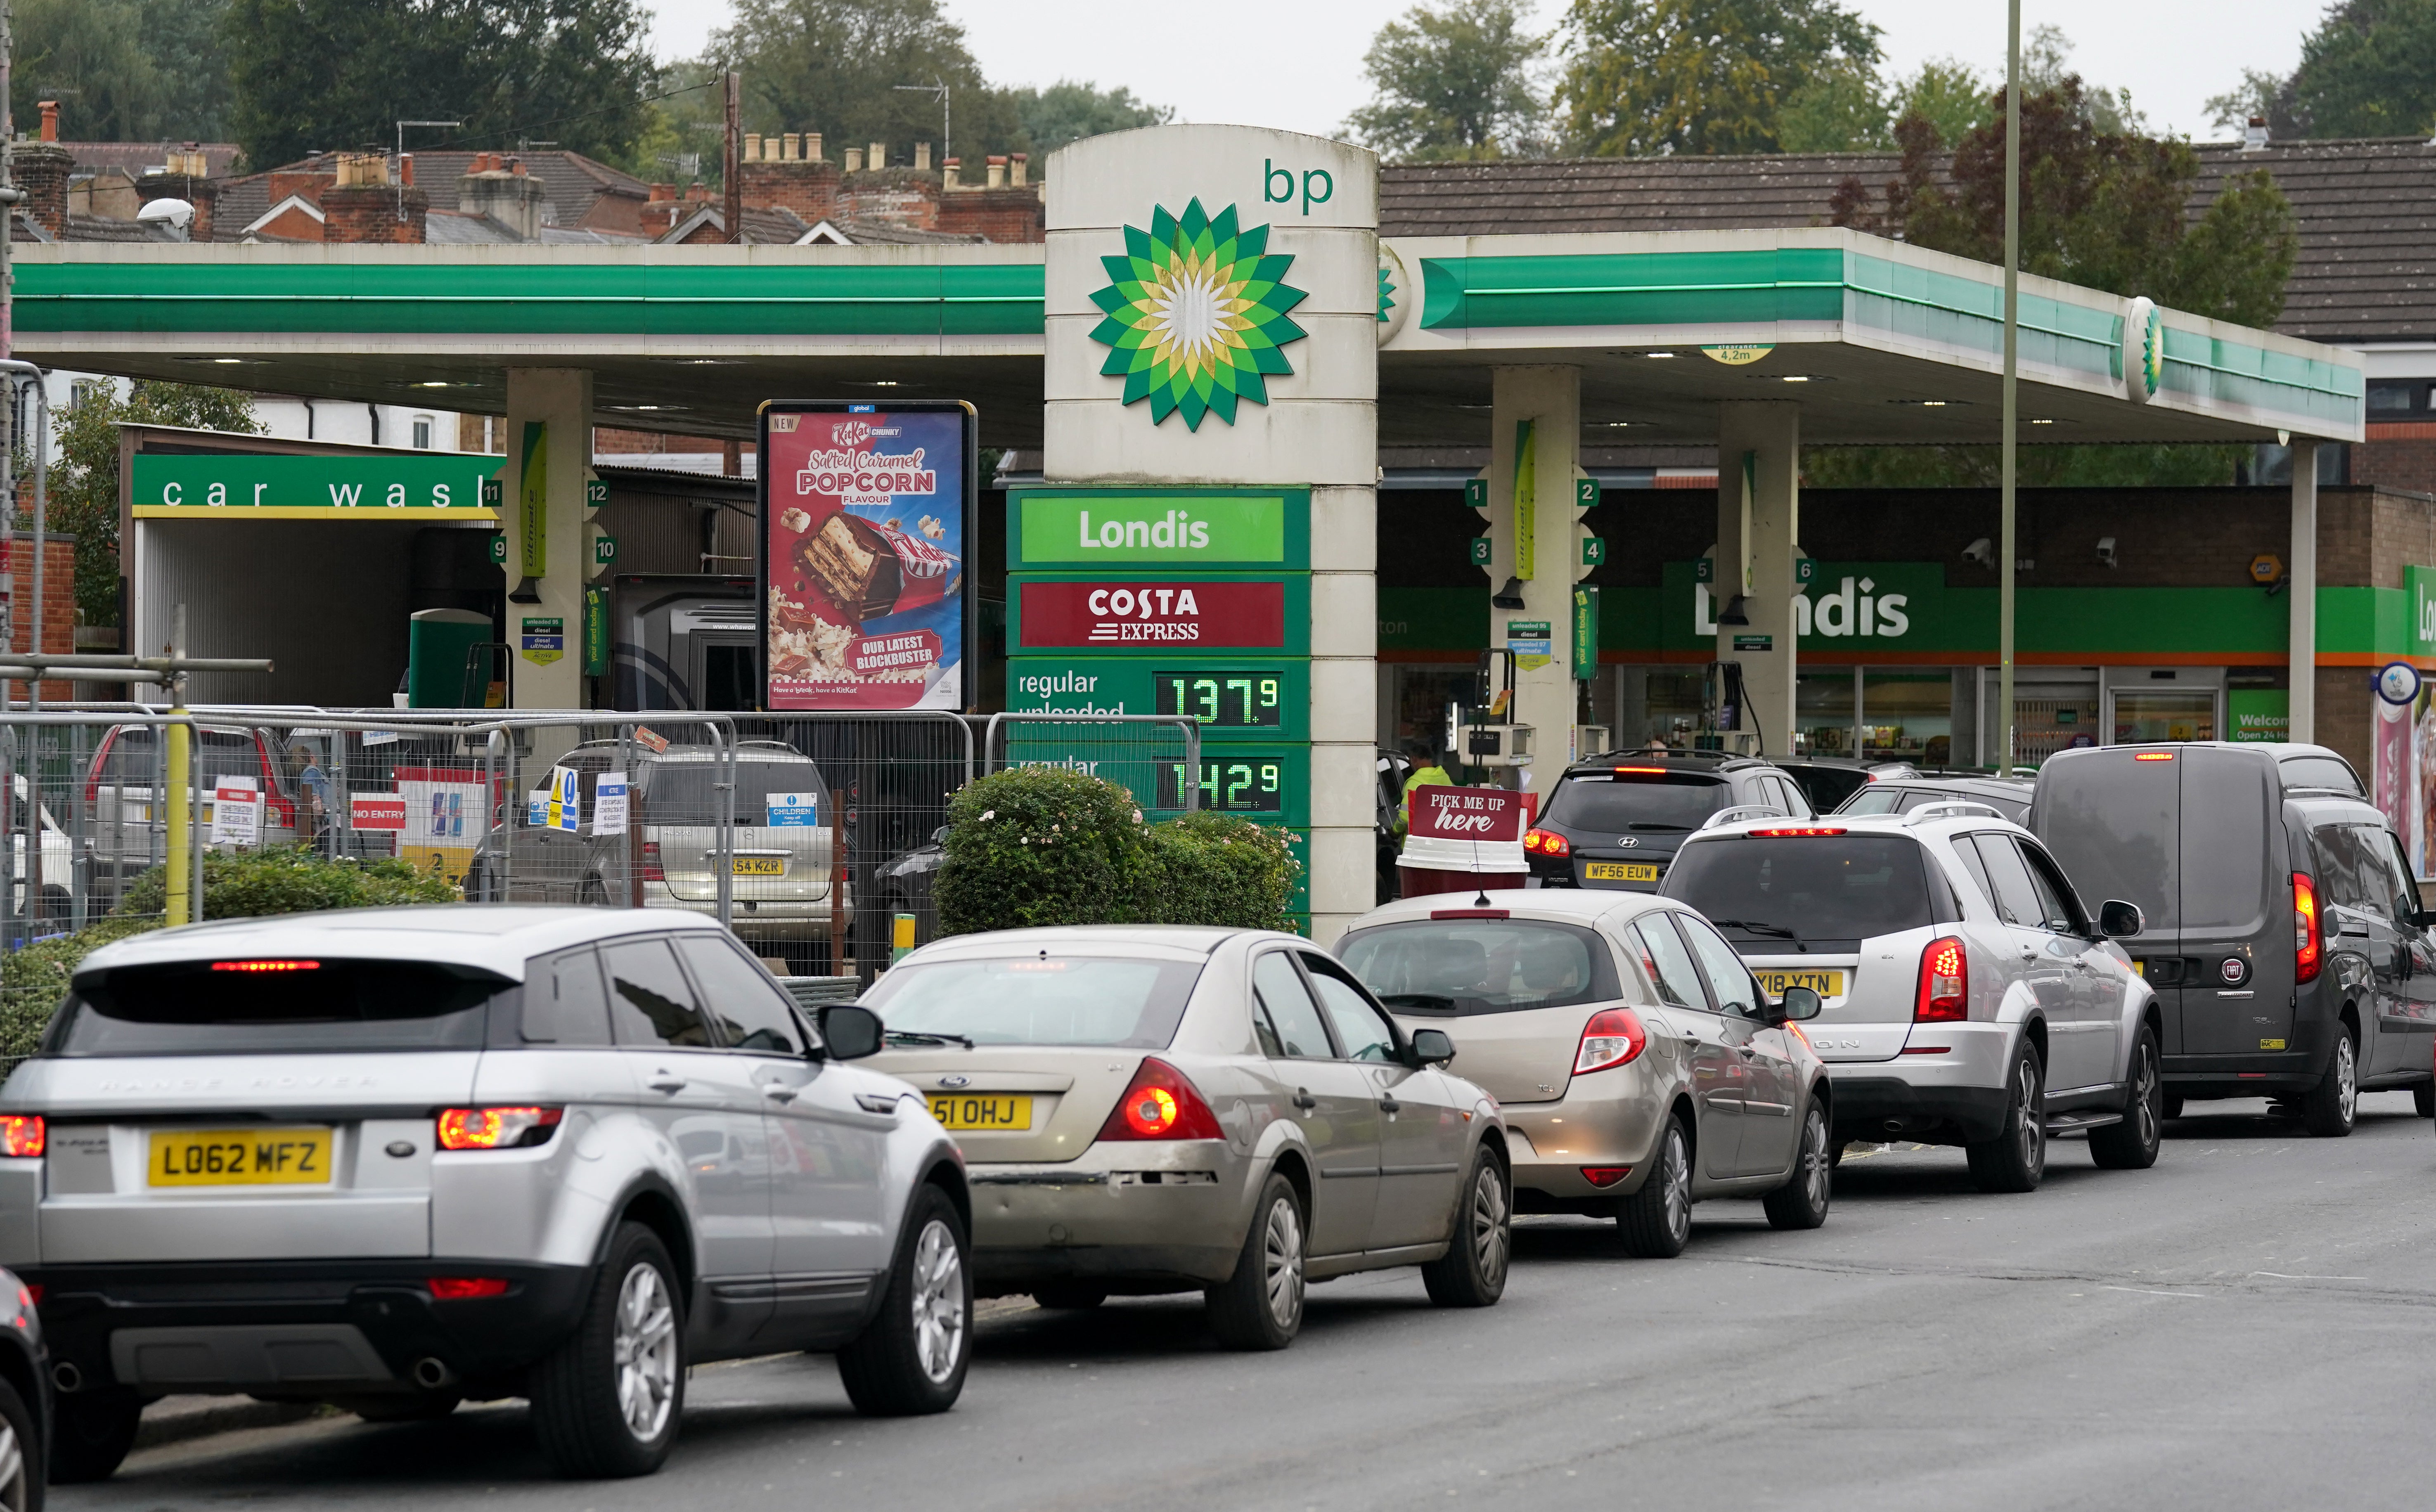 Vehicles queue up outside a BP petrol station in Alton, Hampshire (Andrew Matthews/PA)